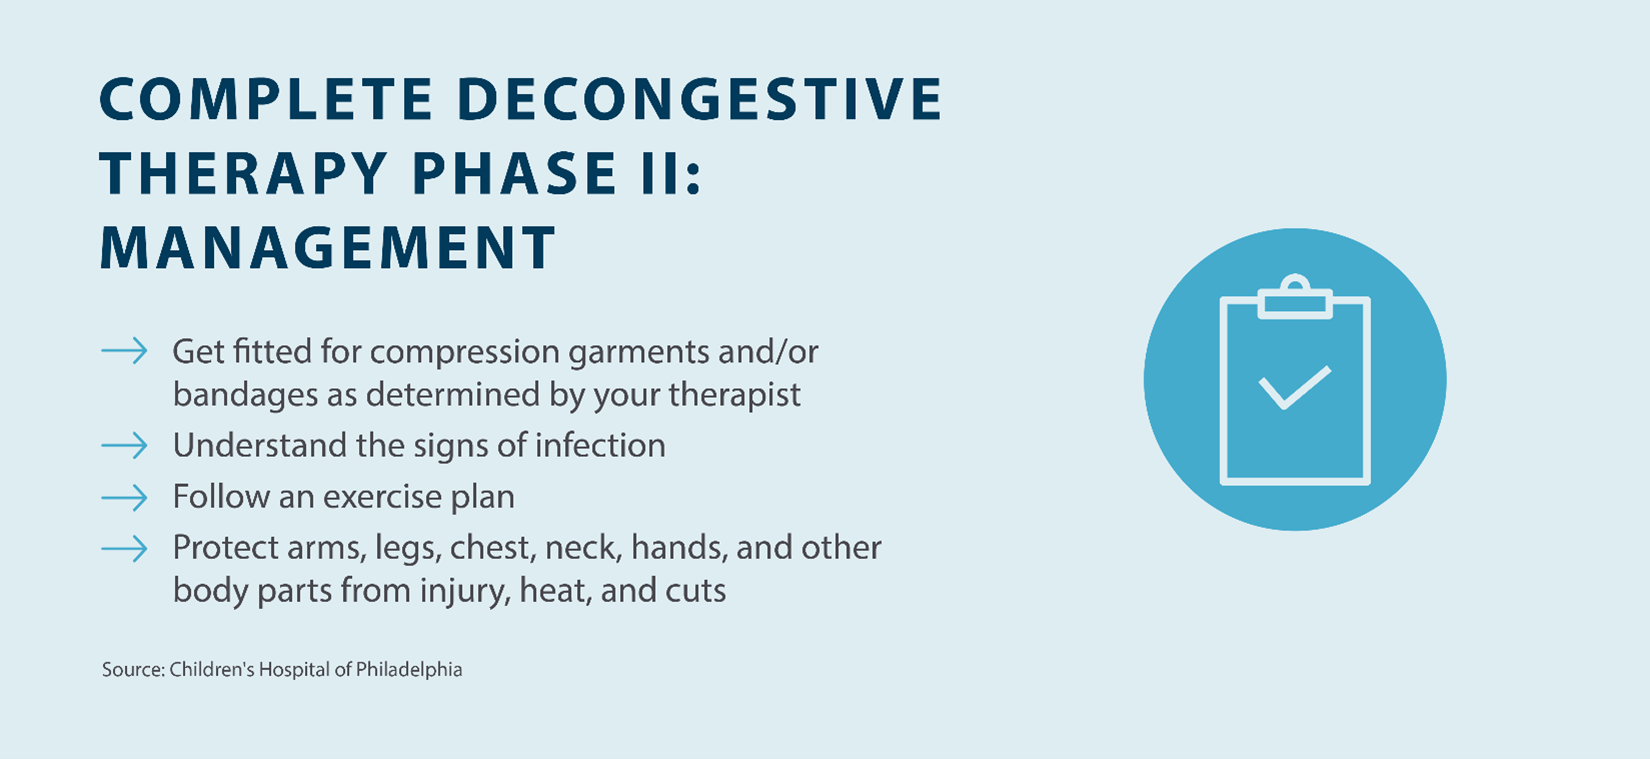 Complete decongestive therapy phase 2